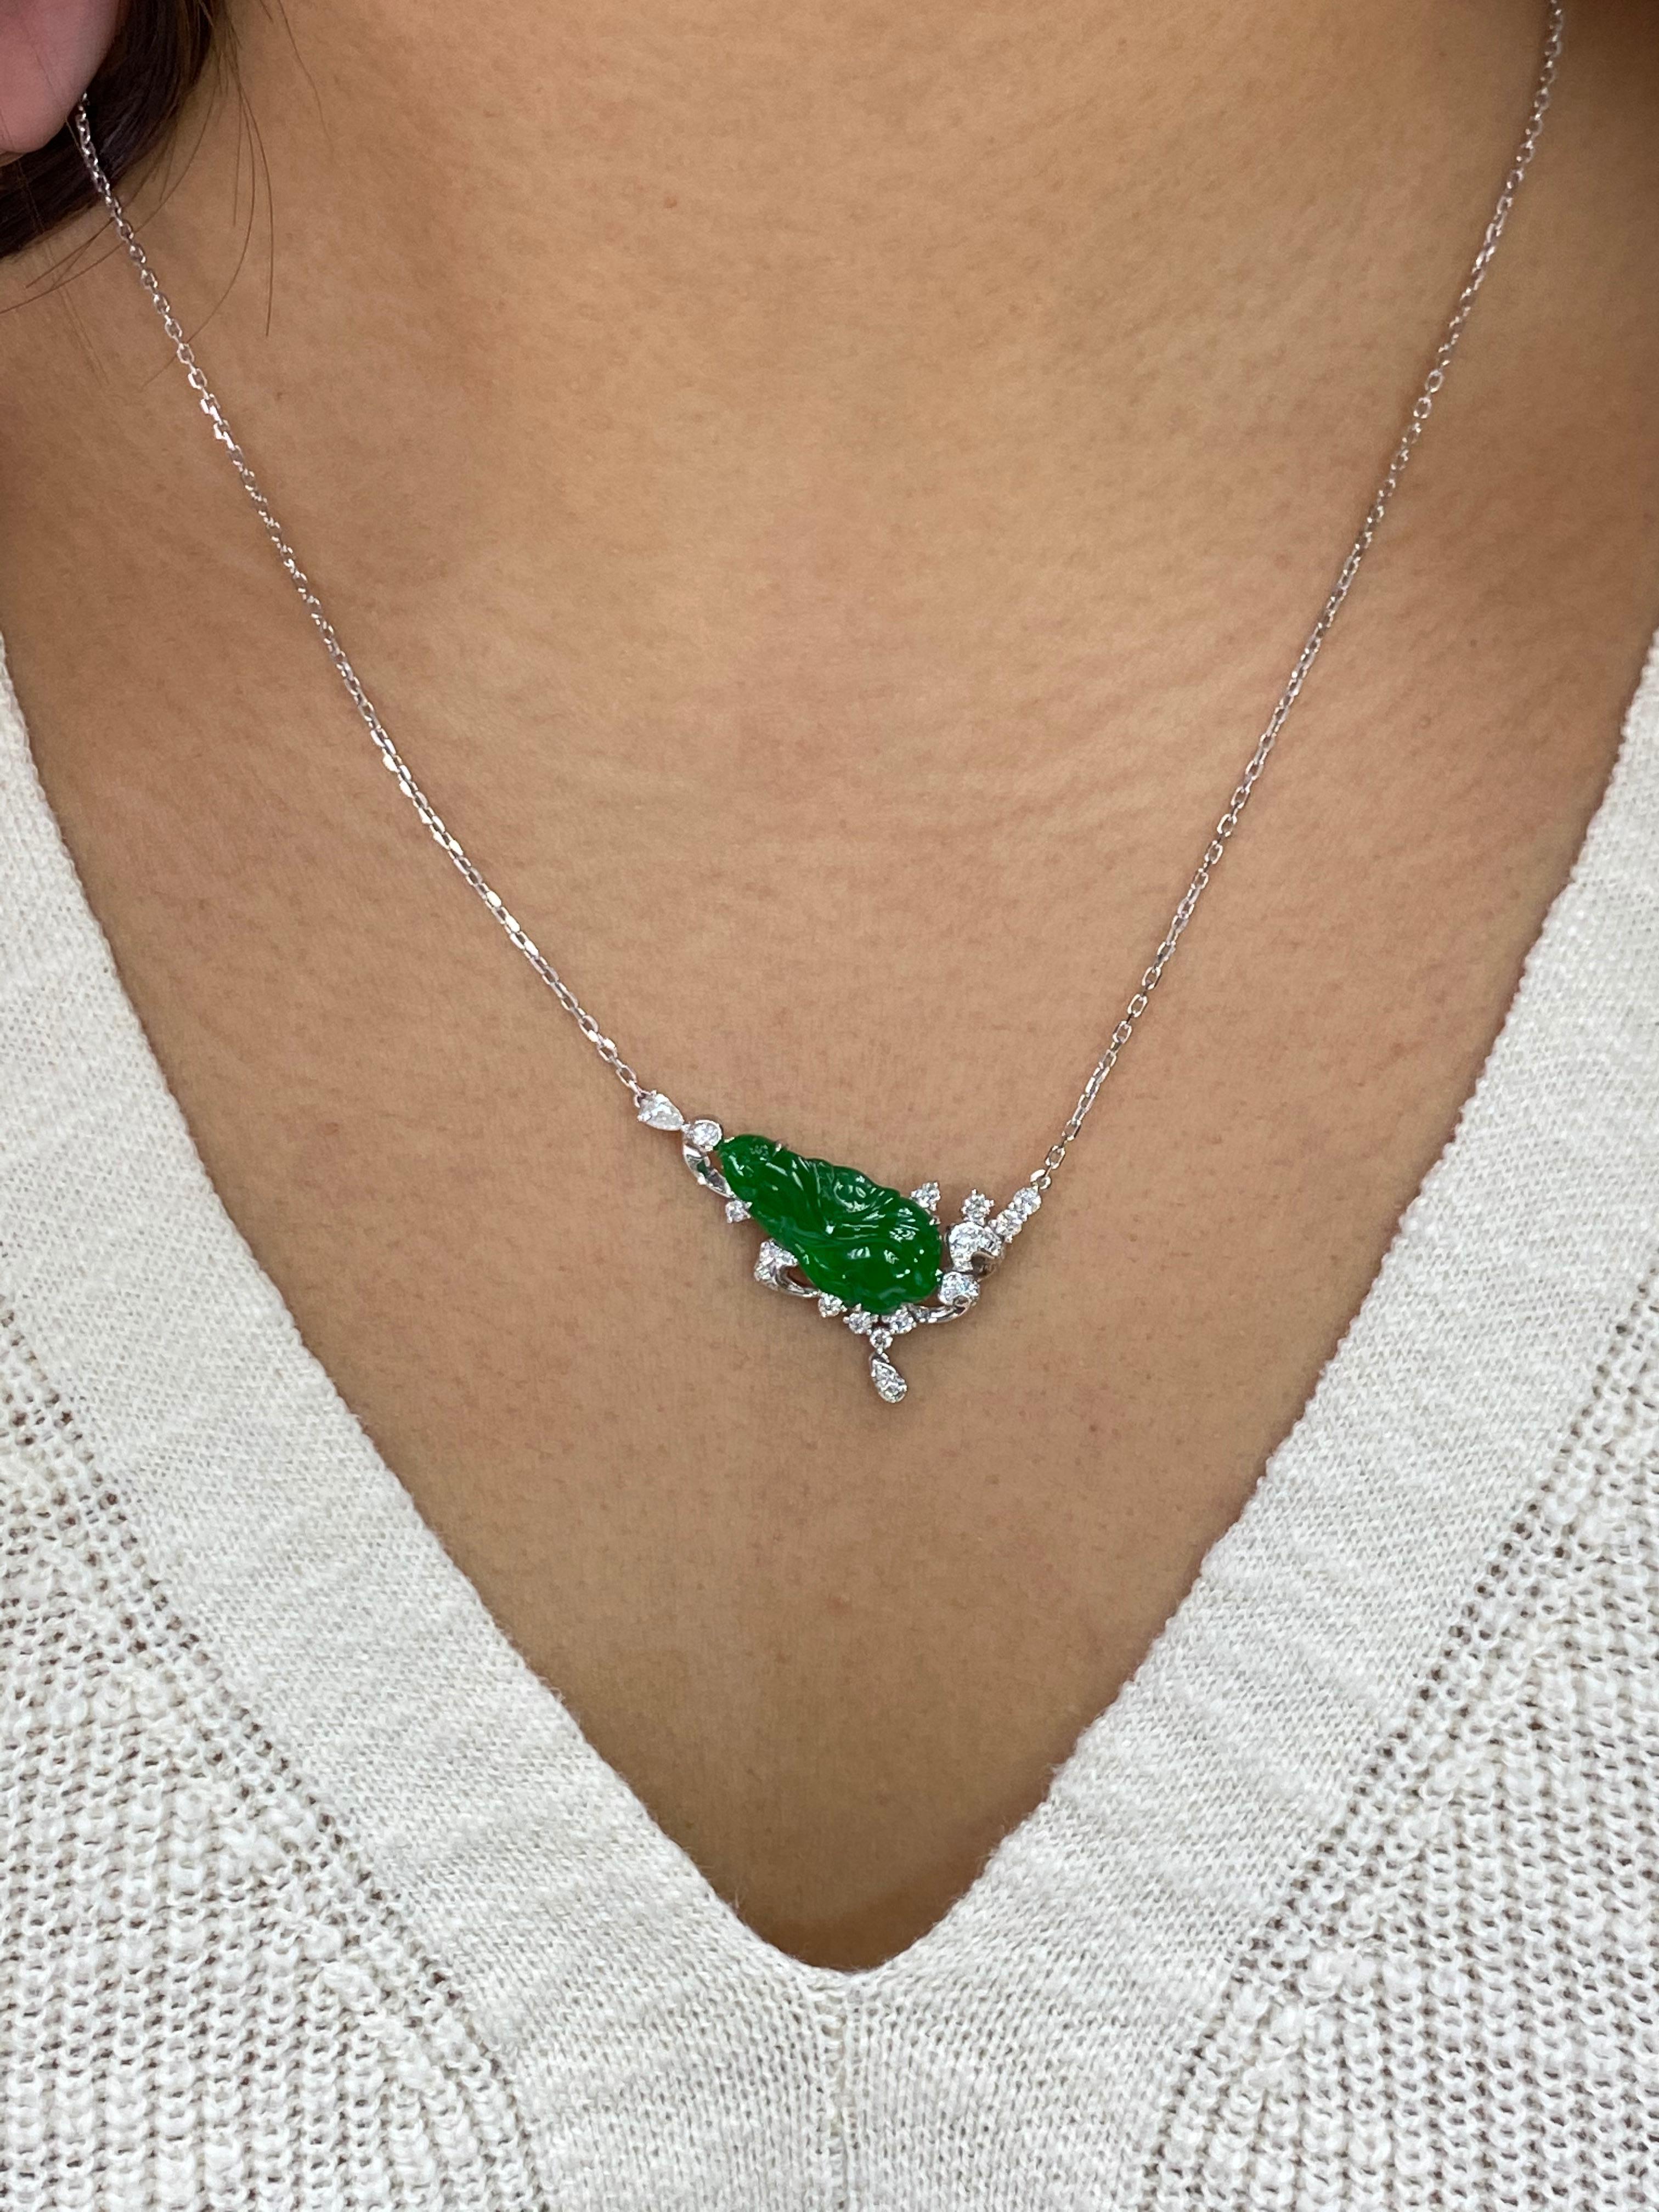 Here is a natural Jadeite Jade and diamond pendant with excellent best imperial green color. It is certified by 2 different labs. The pendant is set in 18k white gold and diamonds. There are diamonds totaling about 0.25 cts set into the pendant. The